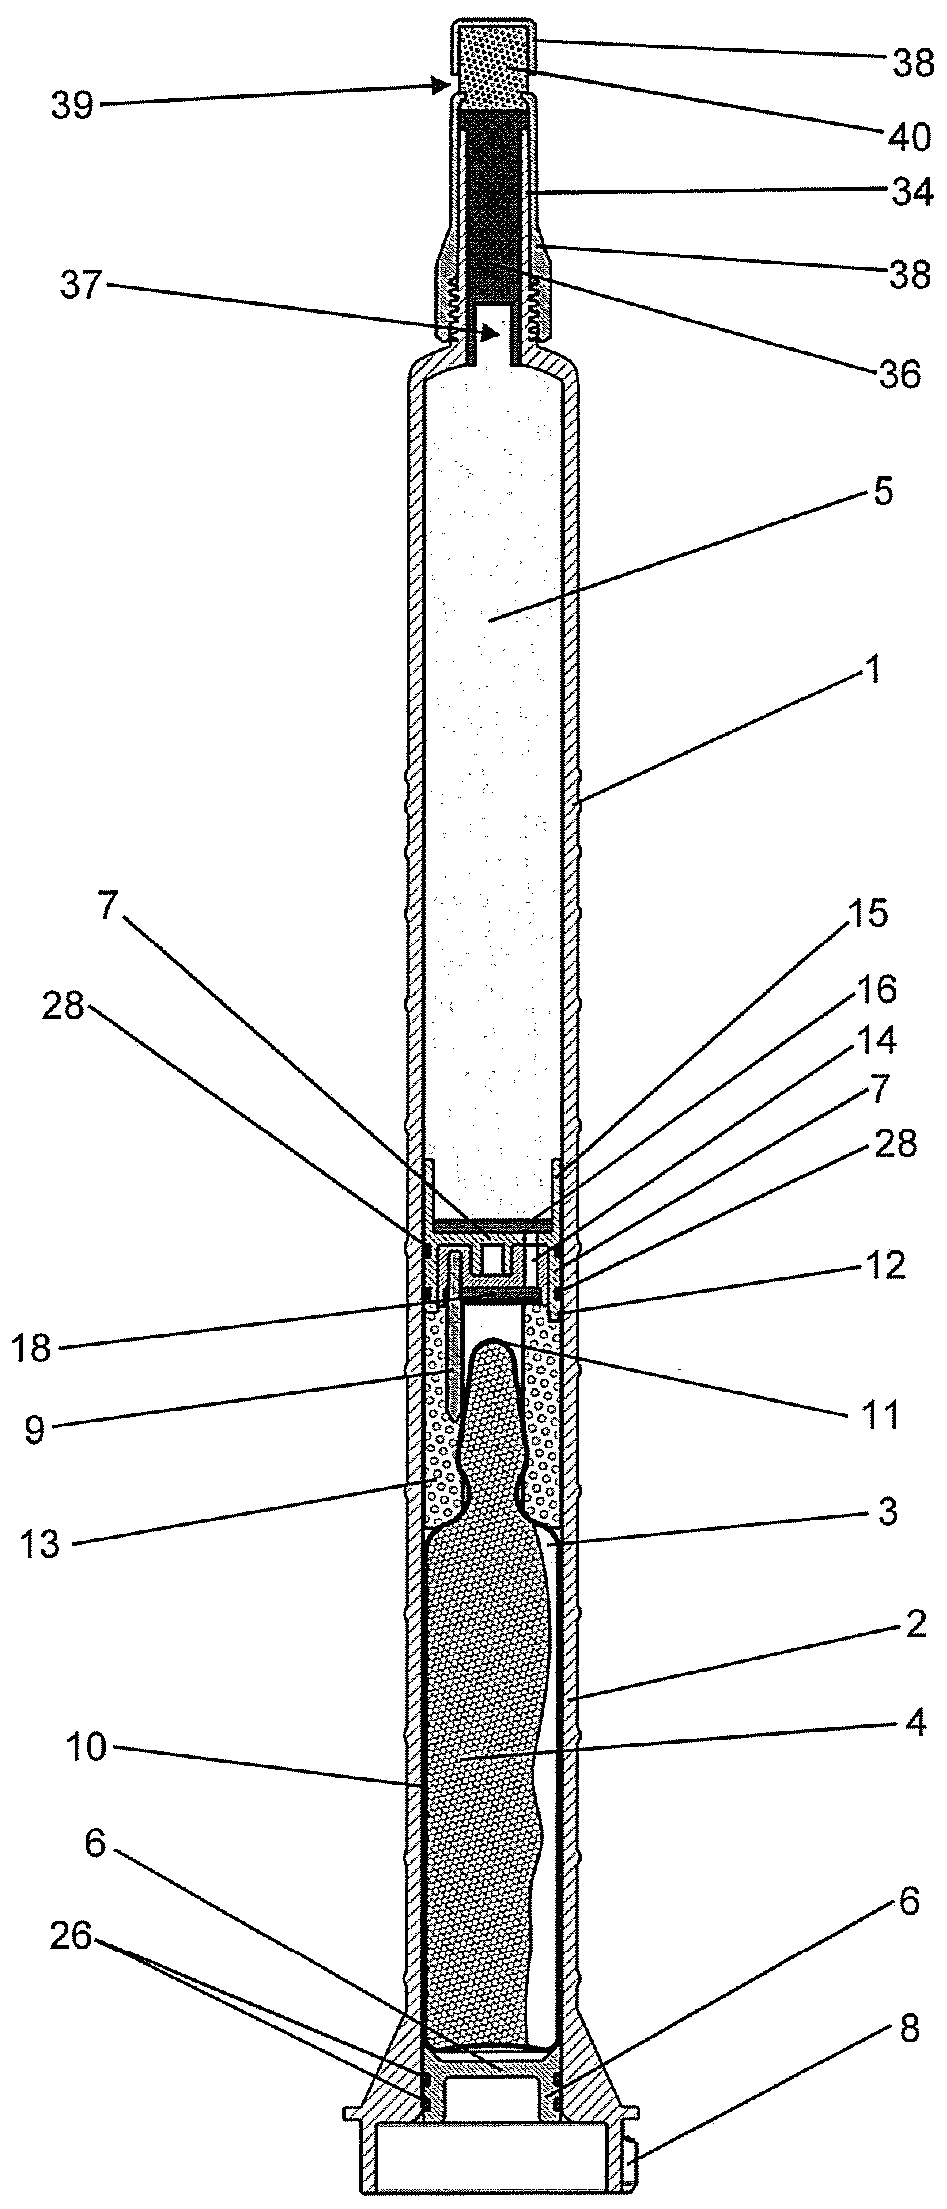 Bone cement mixing device with spacer in an ampoule receptacle